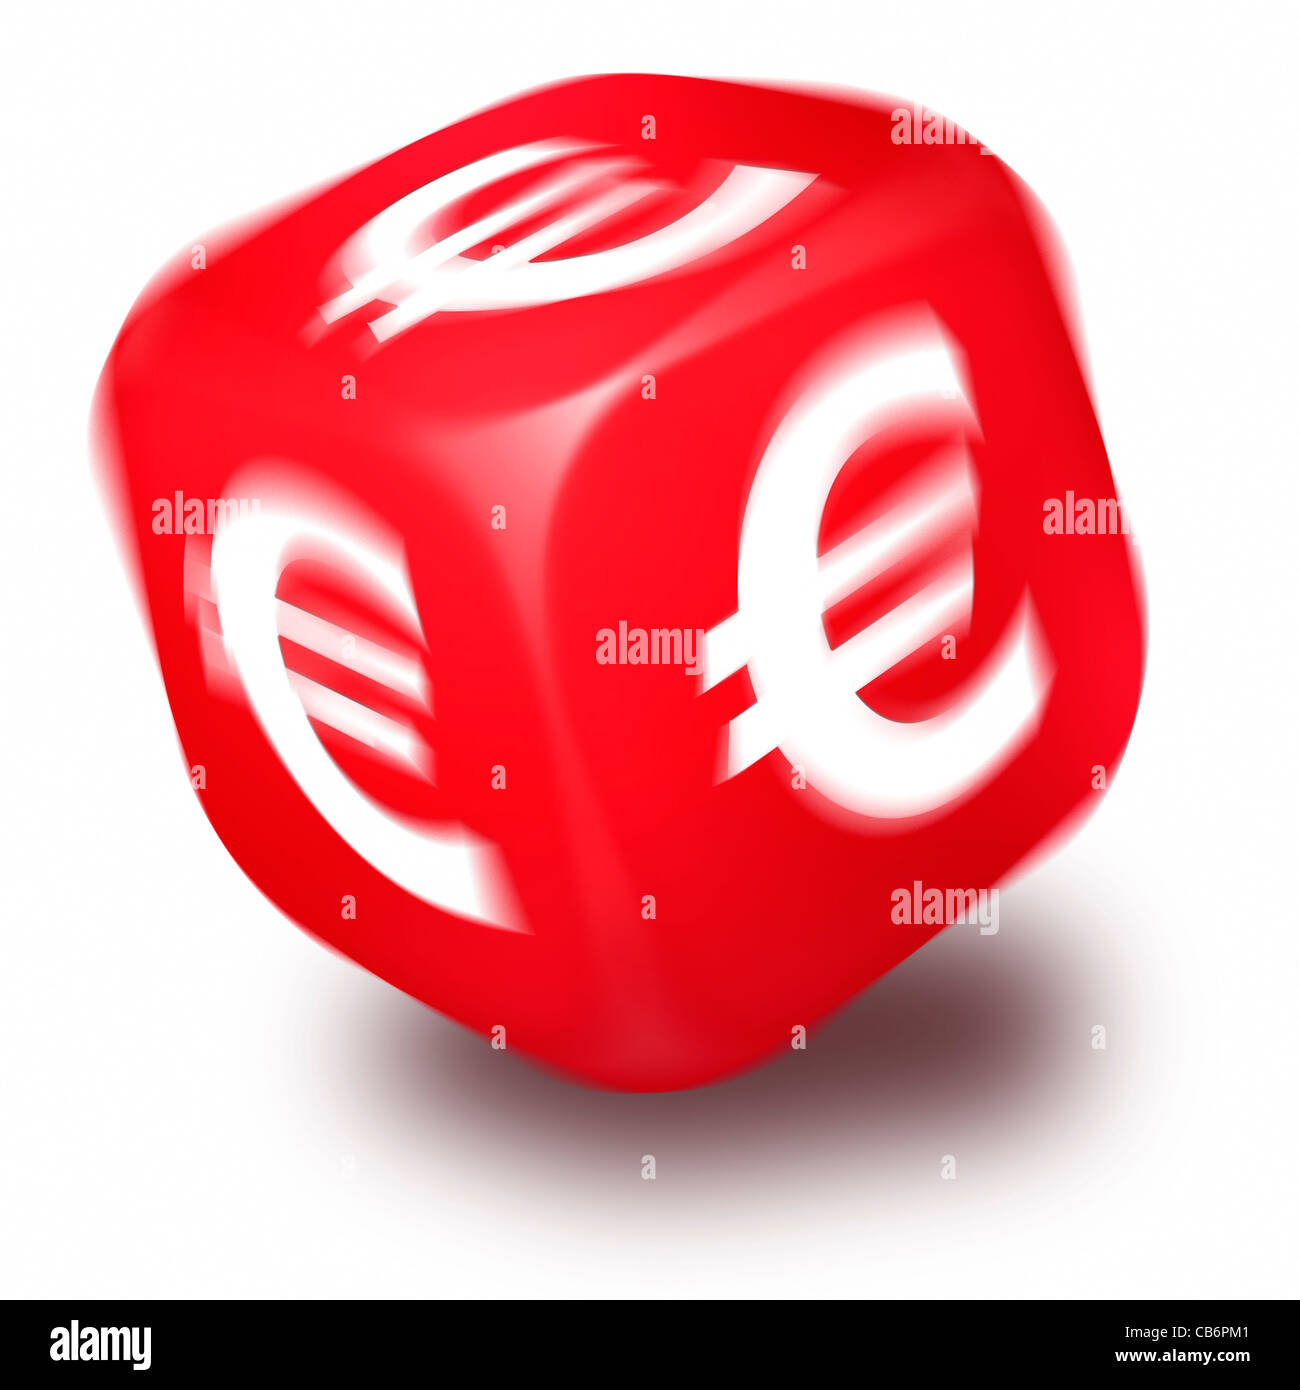 Spinning red dice with the Euro symbol printed on each face Stock Photo